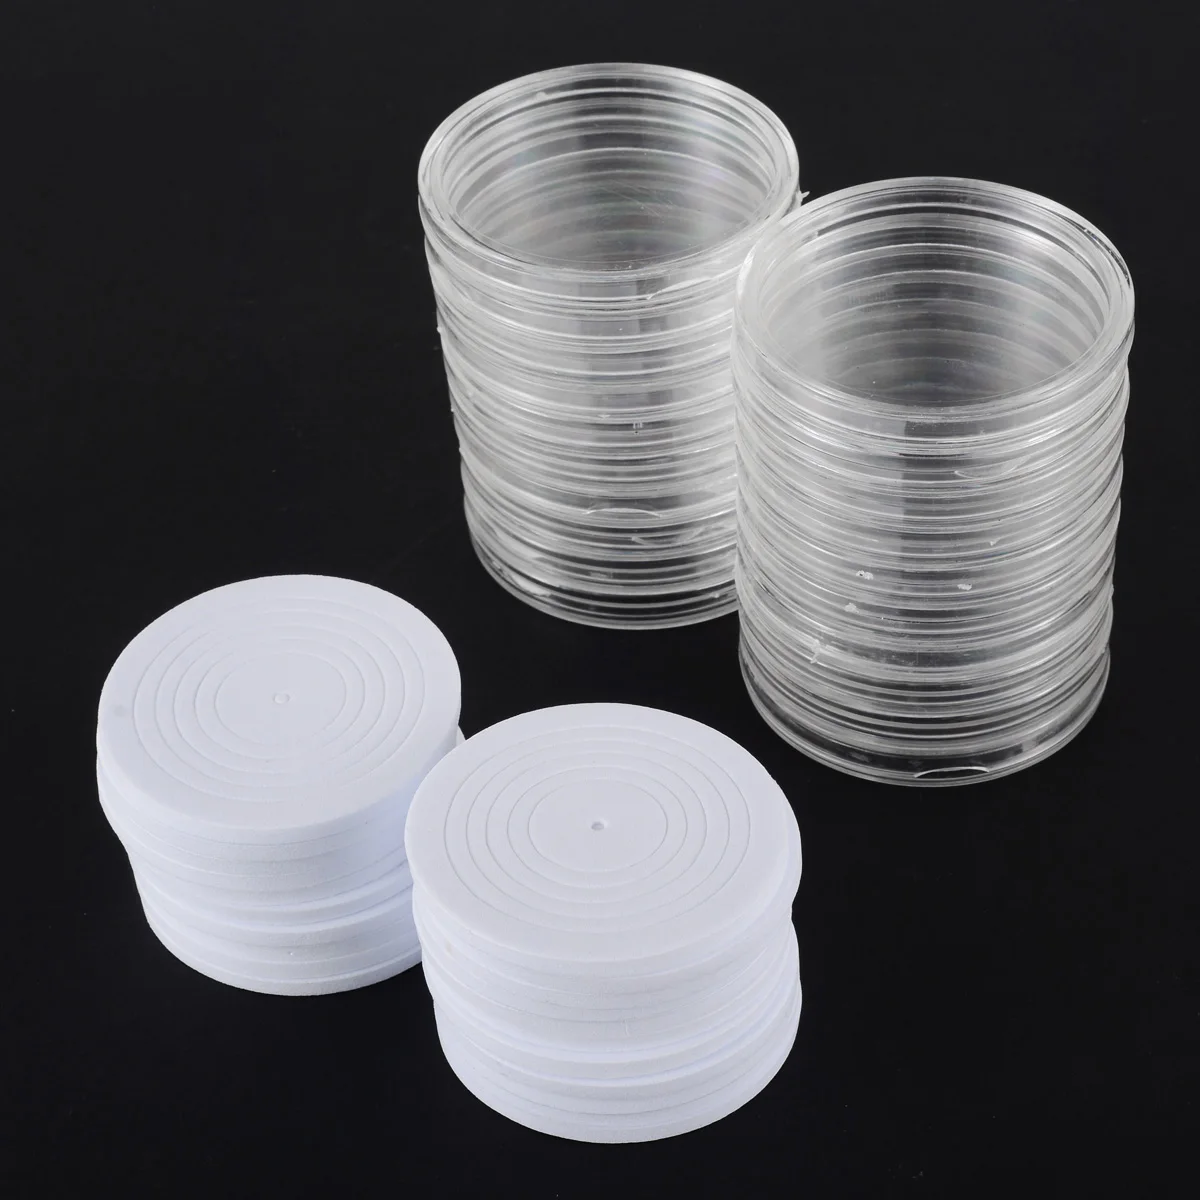 

20pcs 46mm Round Clear Coin Capsules Holder Storage Case Container Display Boxes Small Plastic Coin Case for Zodiac Coins